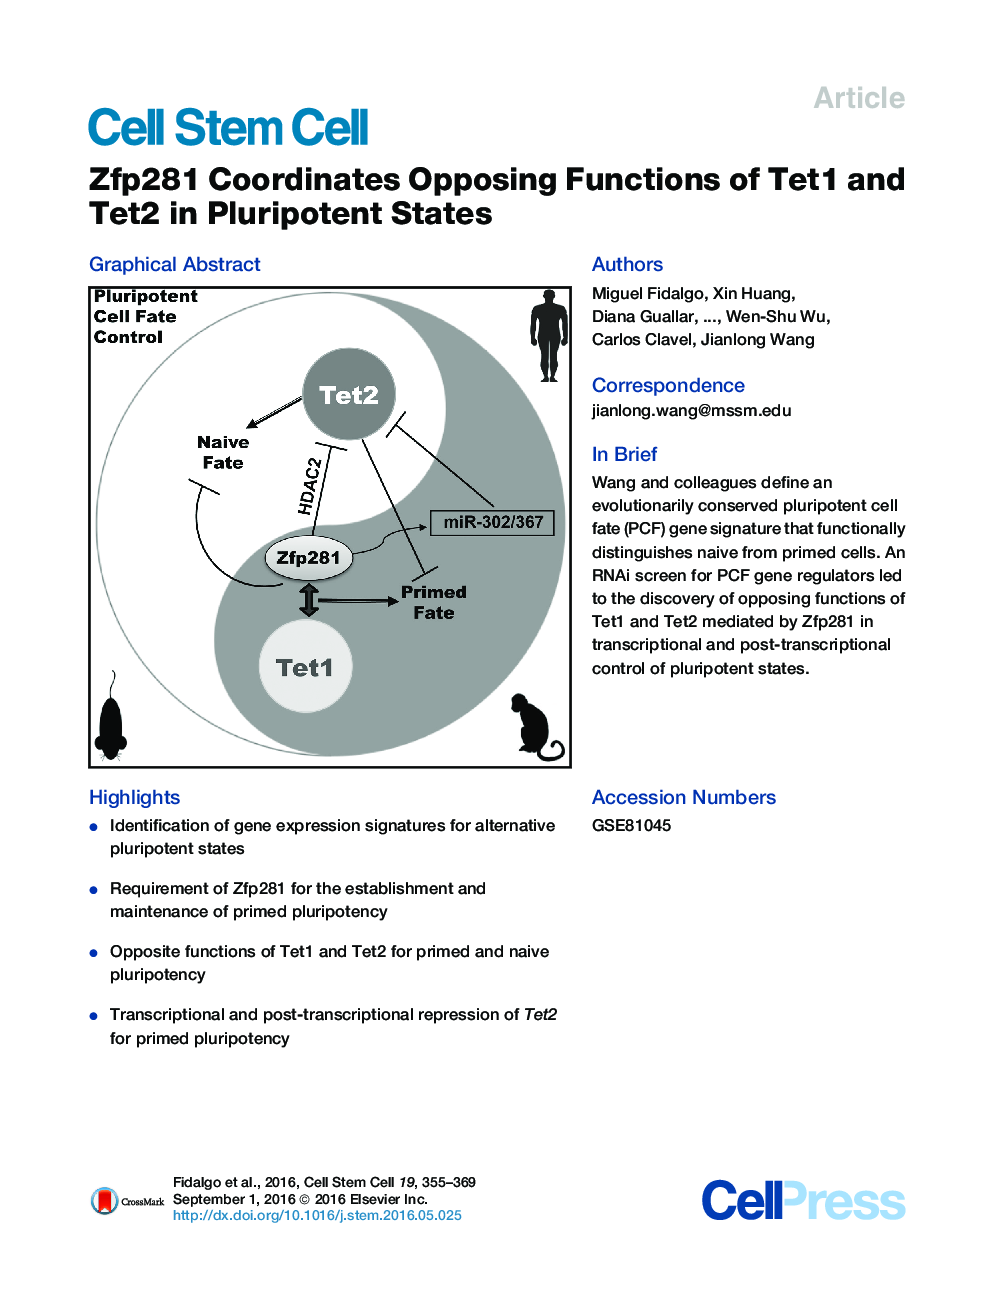 Zfp281 Coordinates Opposing Functions of Tet1 and Tet2 in Pluripotent States